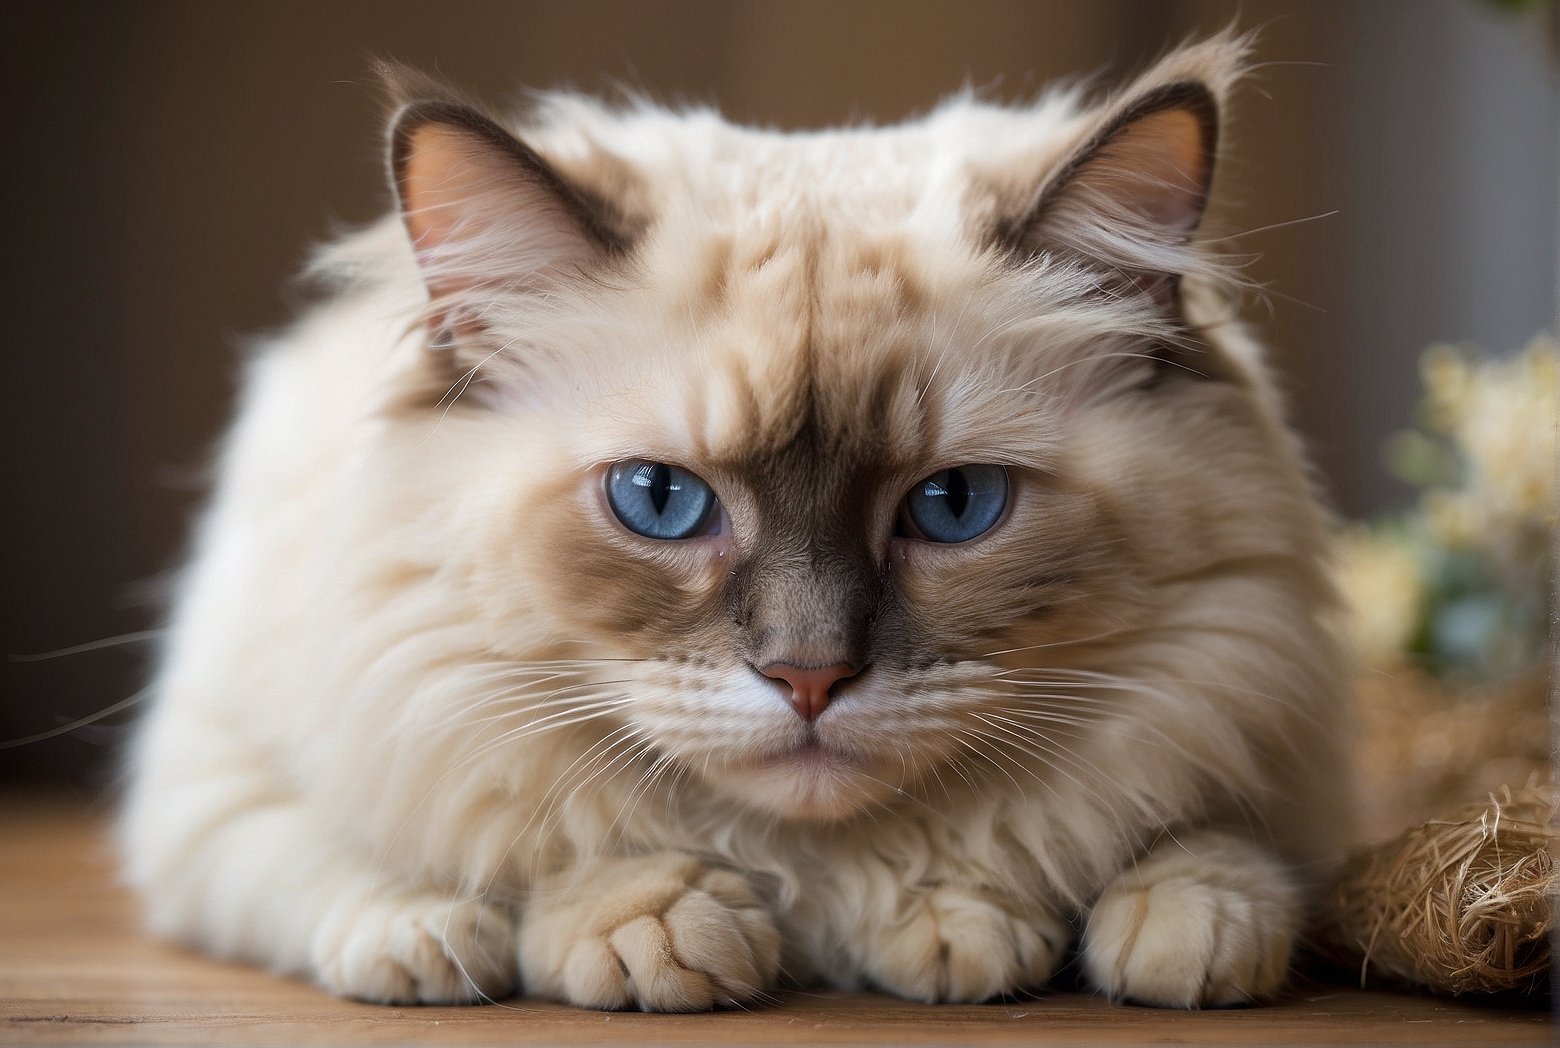 Can Ragdoll Cats Trigger Allergies?